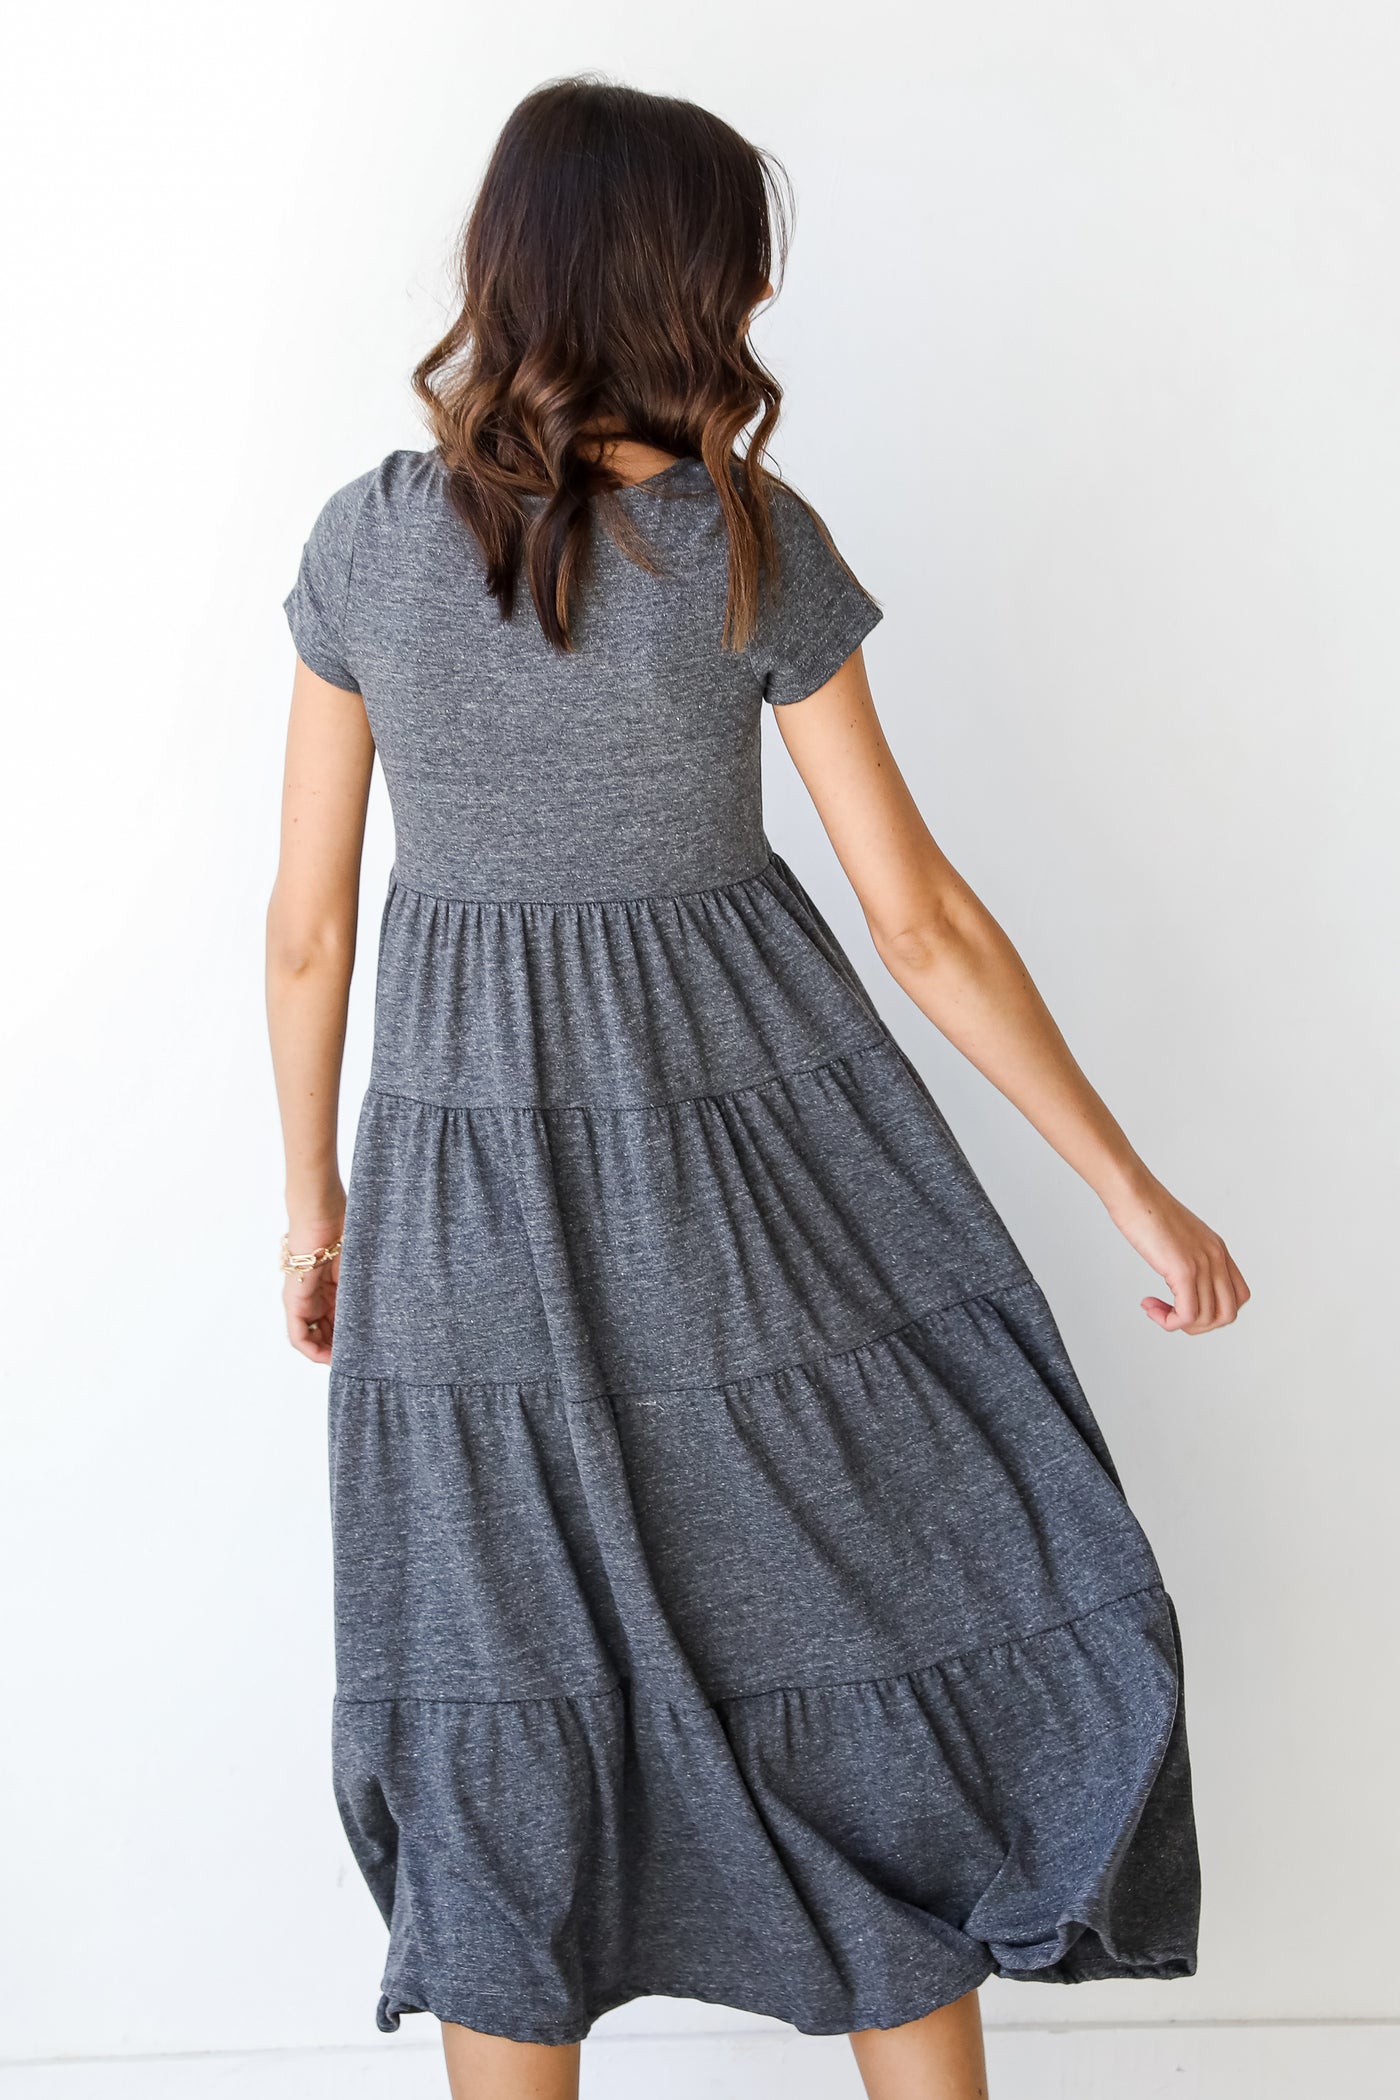 Tiered Maxi Dress in charcoal back view